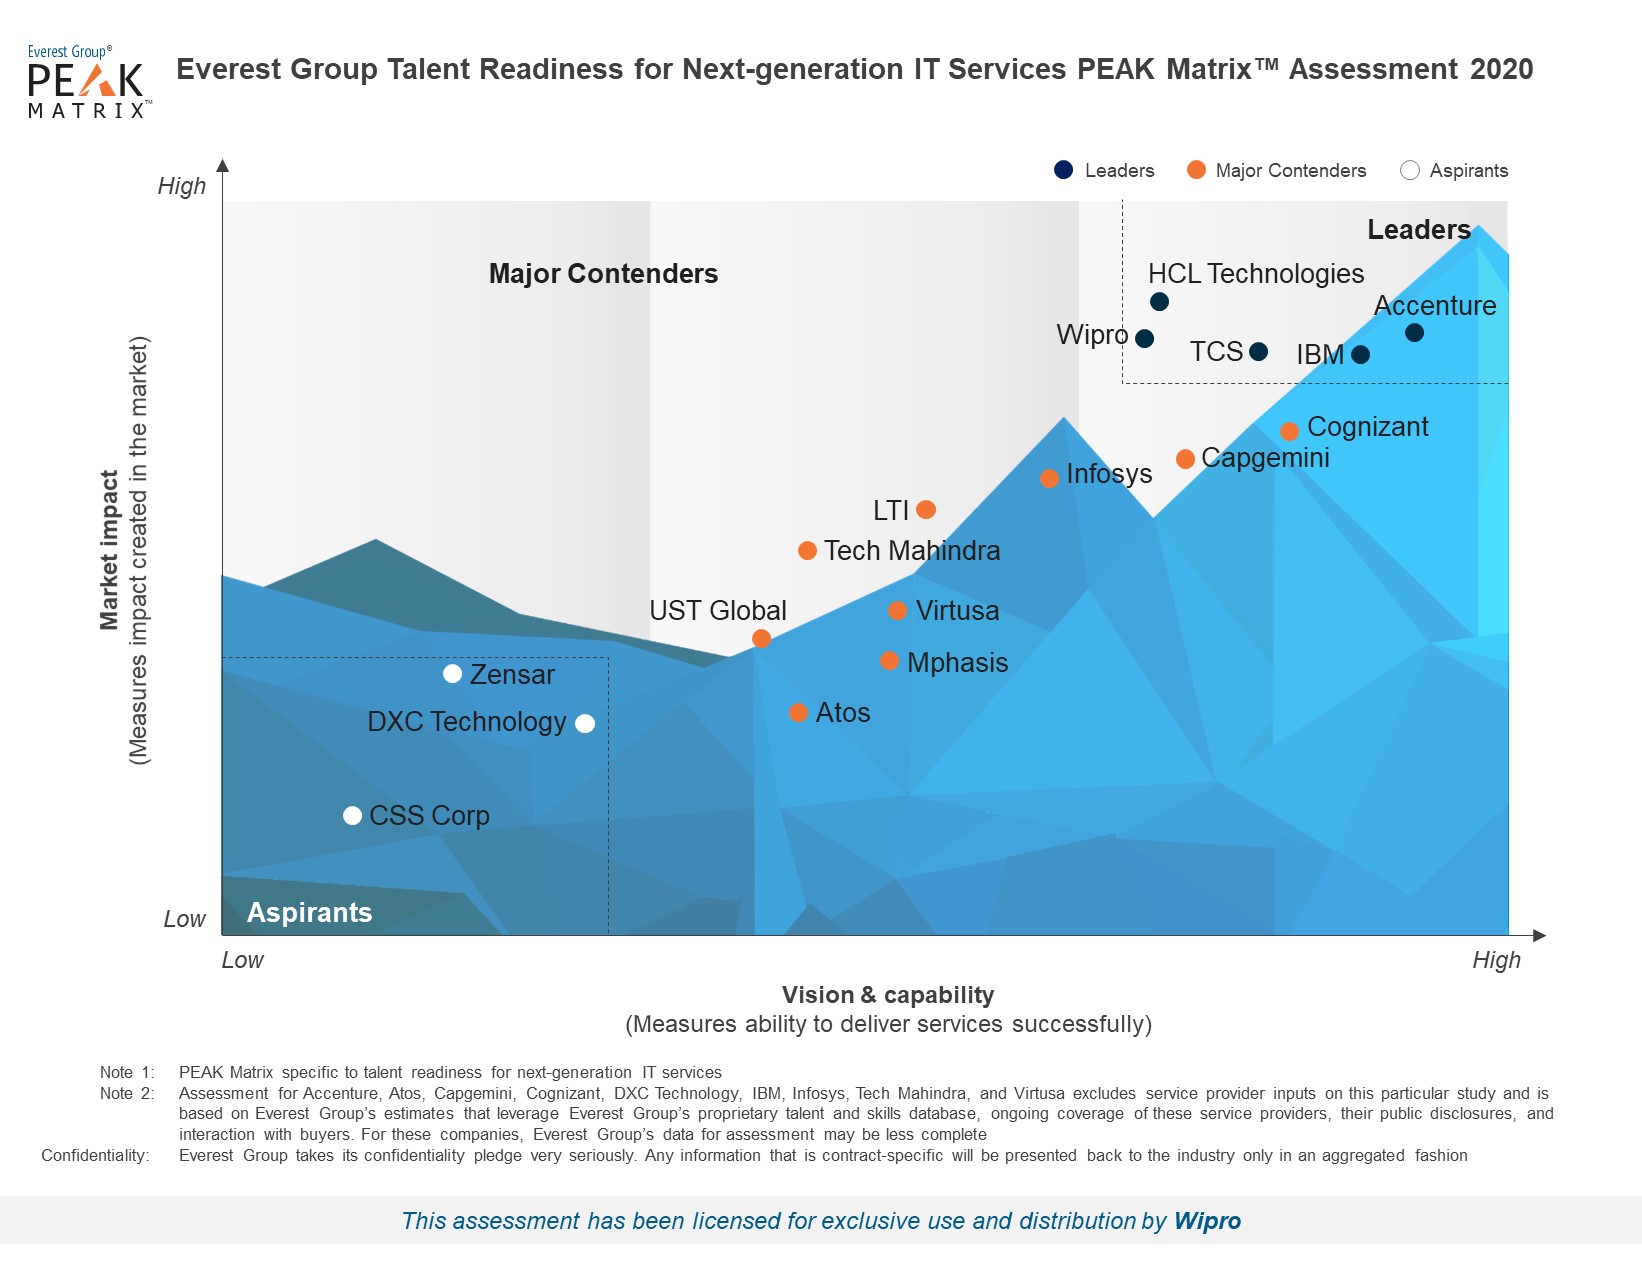 Wipro positioned as a Leader in Talent Readiness for Next-generation IT Services PEAK Matrix™ Assessment 2020